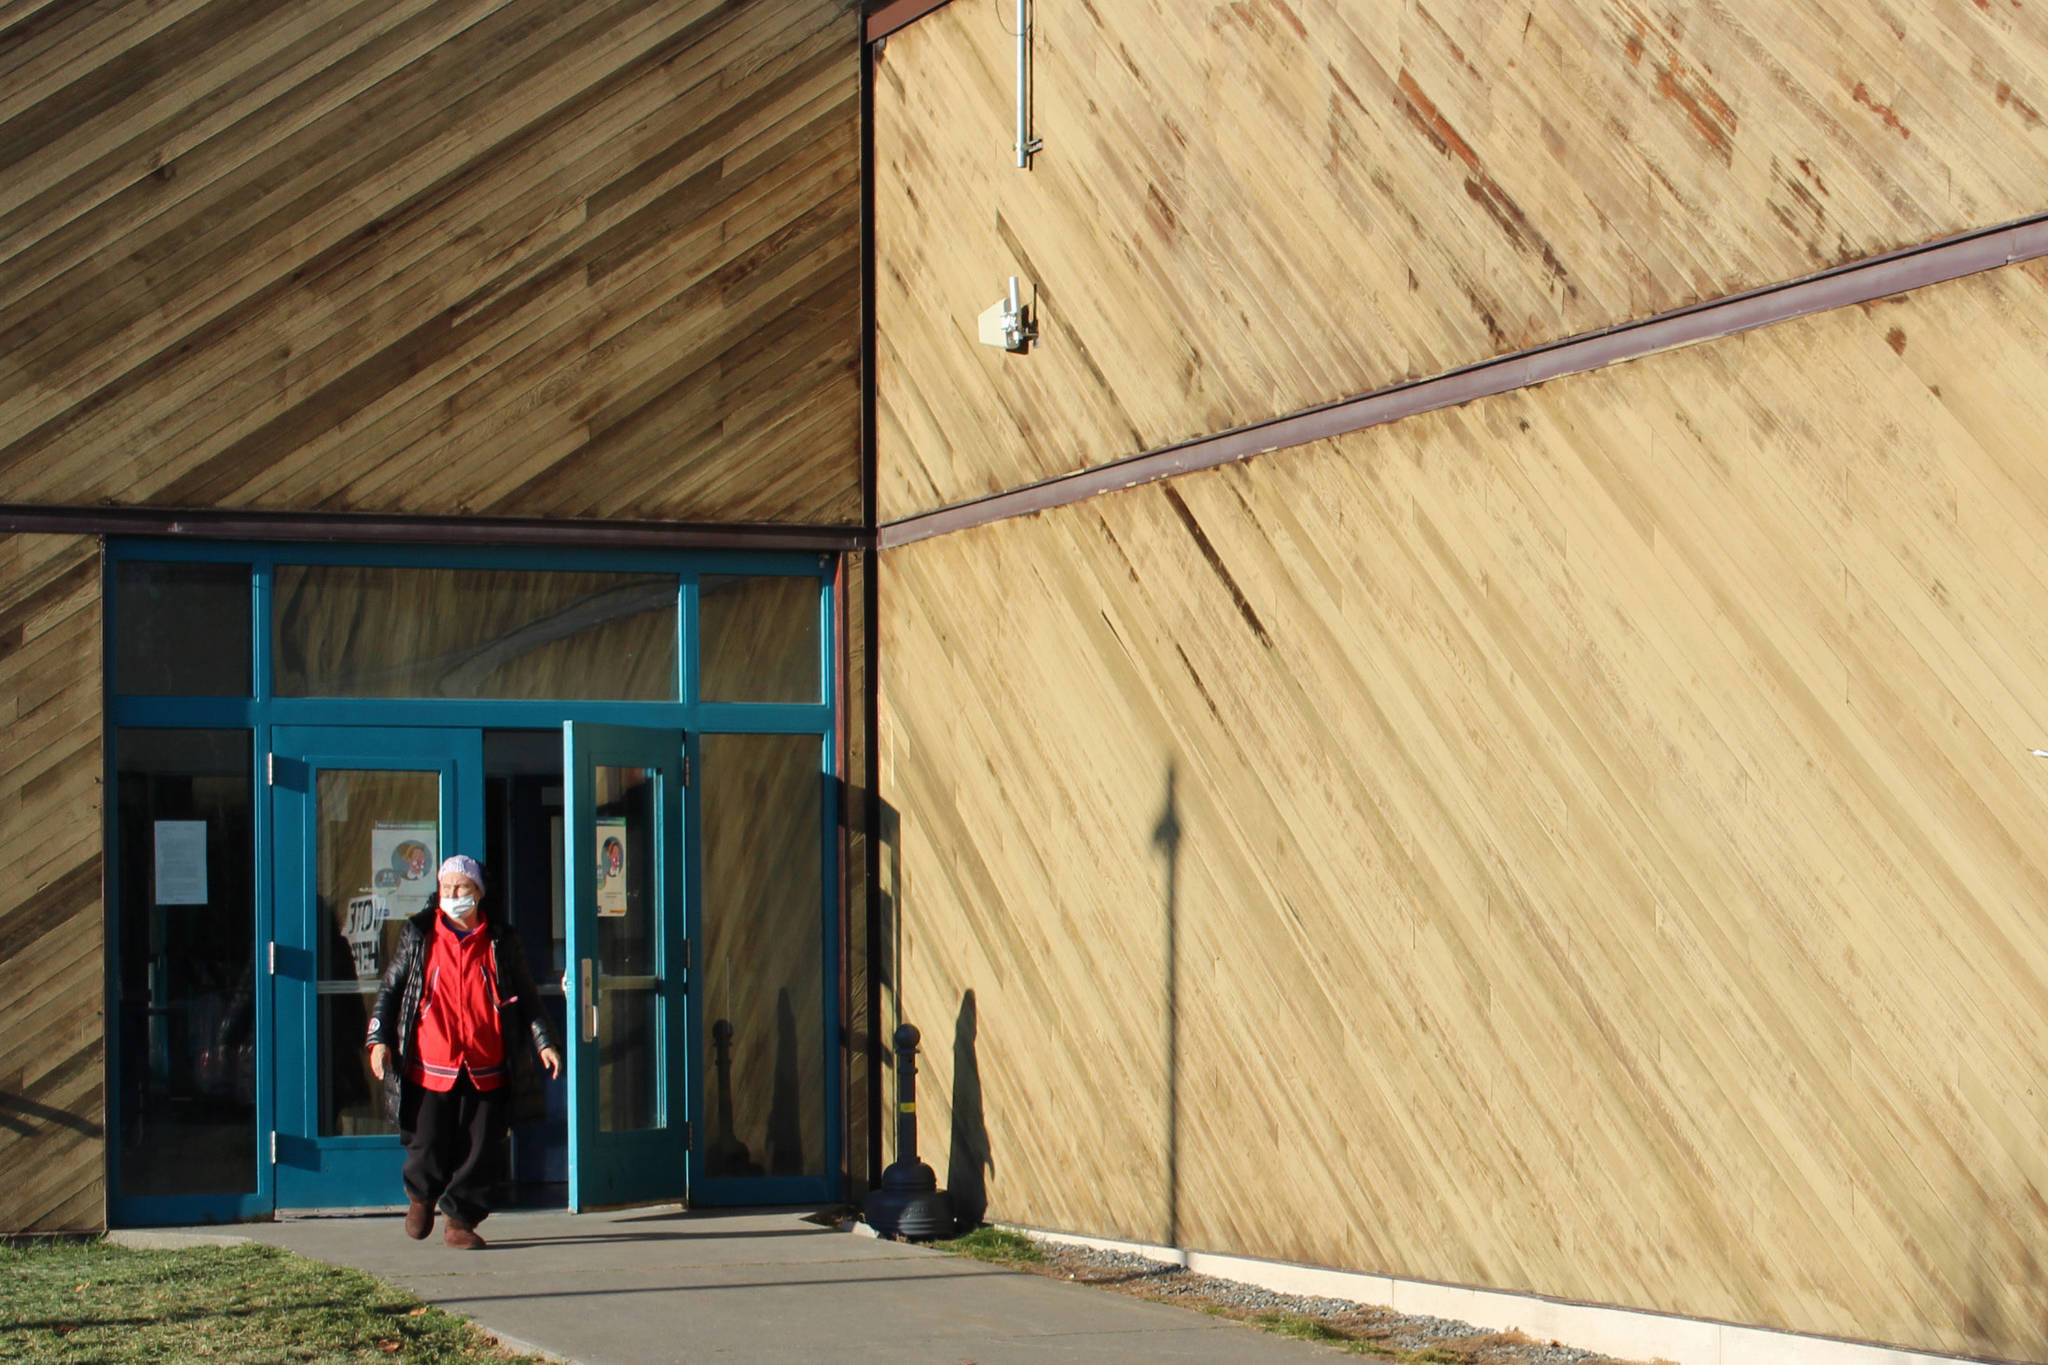 An entrance to the Soldotna Regional Sports Complex as seen in November 2020. (Photo by Brian Mazurek/Peninsula Clarion)